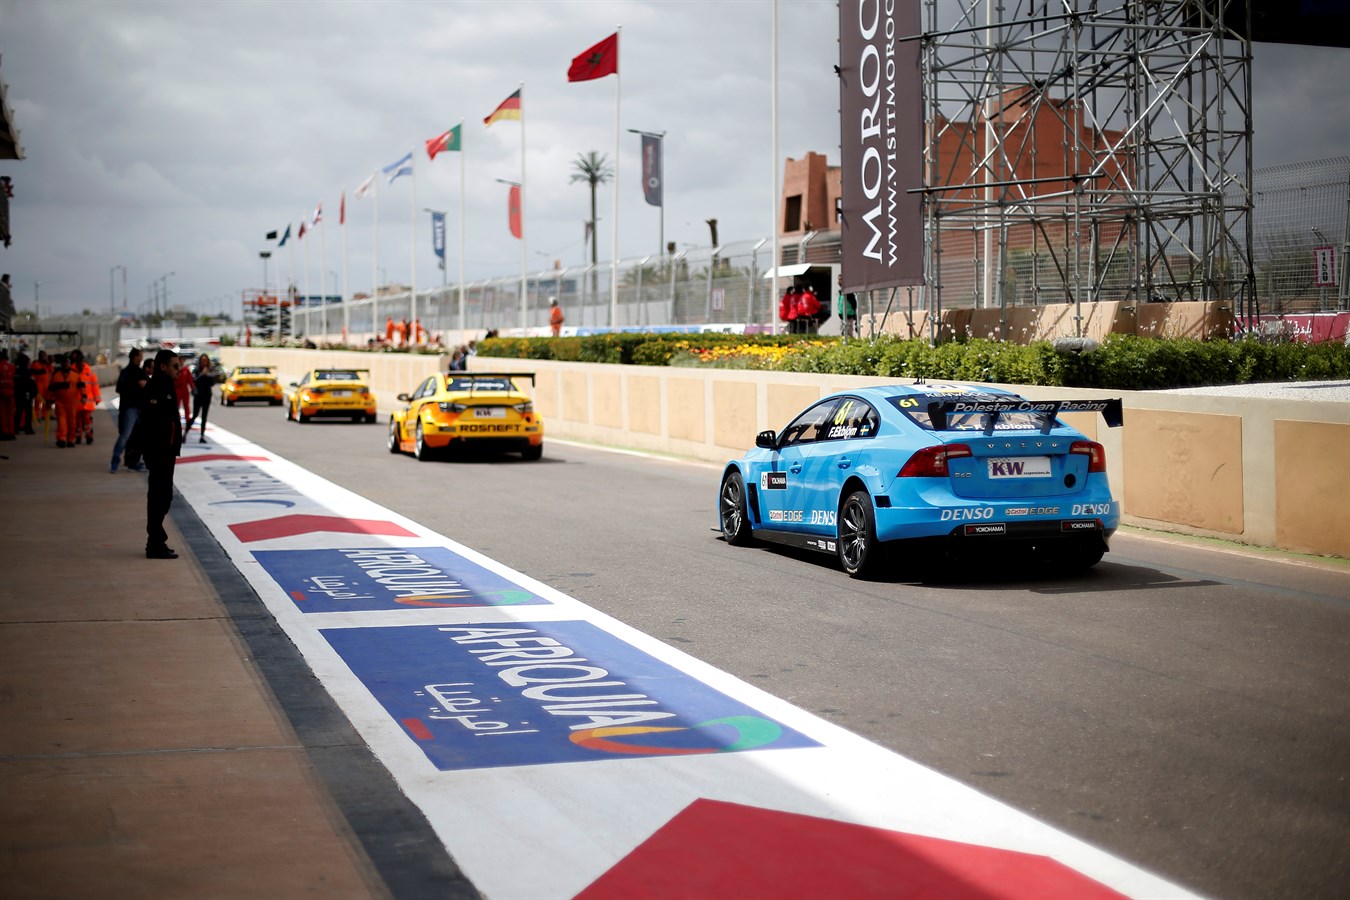 Challenging Marrakech races concludes promising first WTCC third